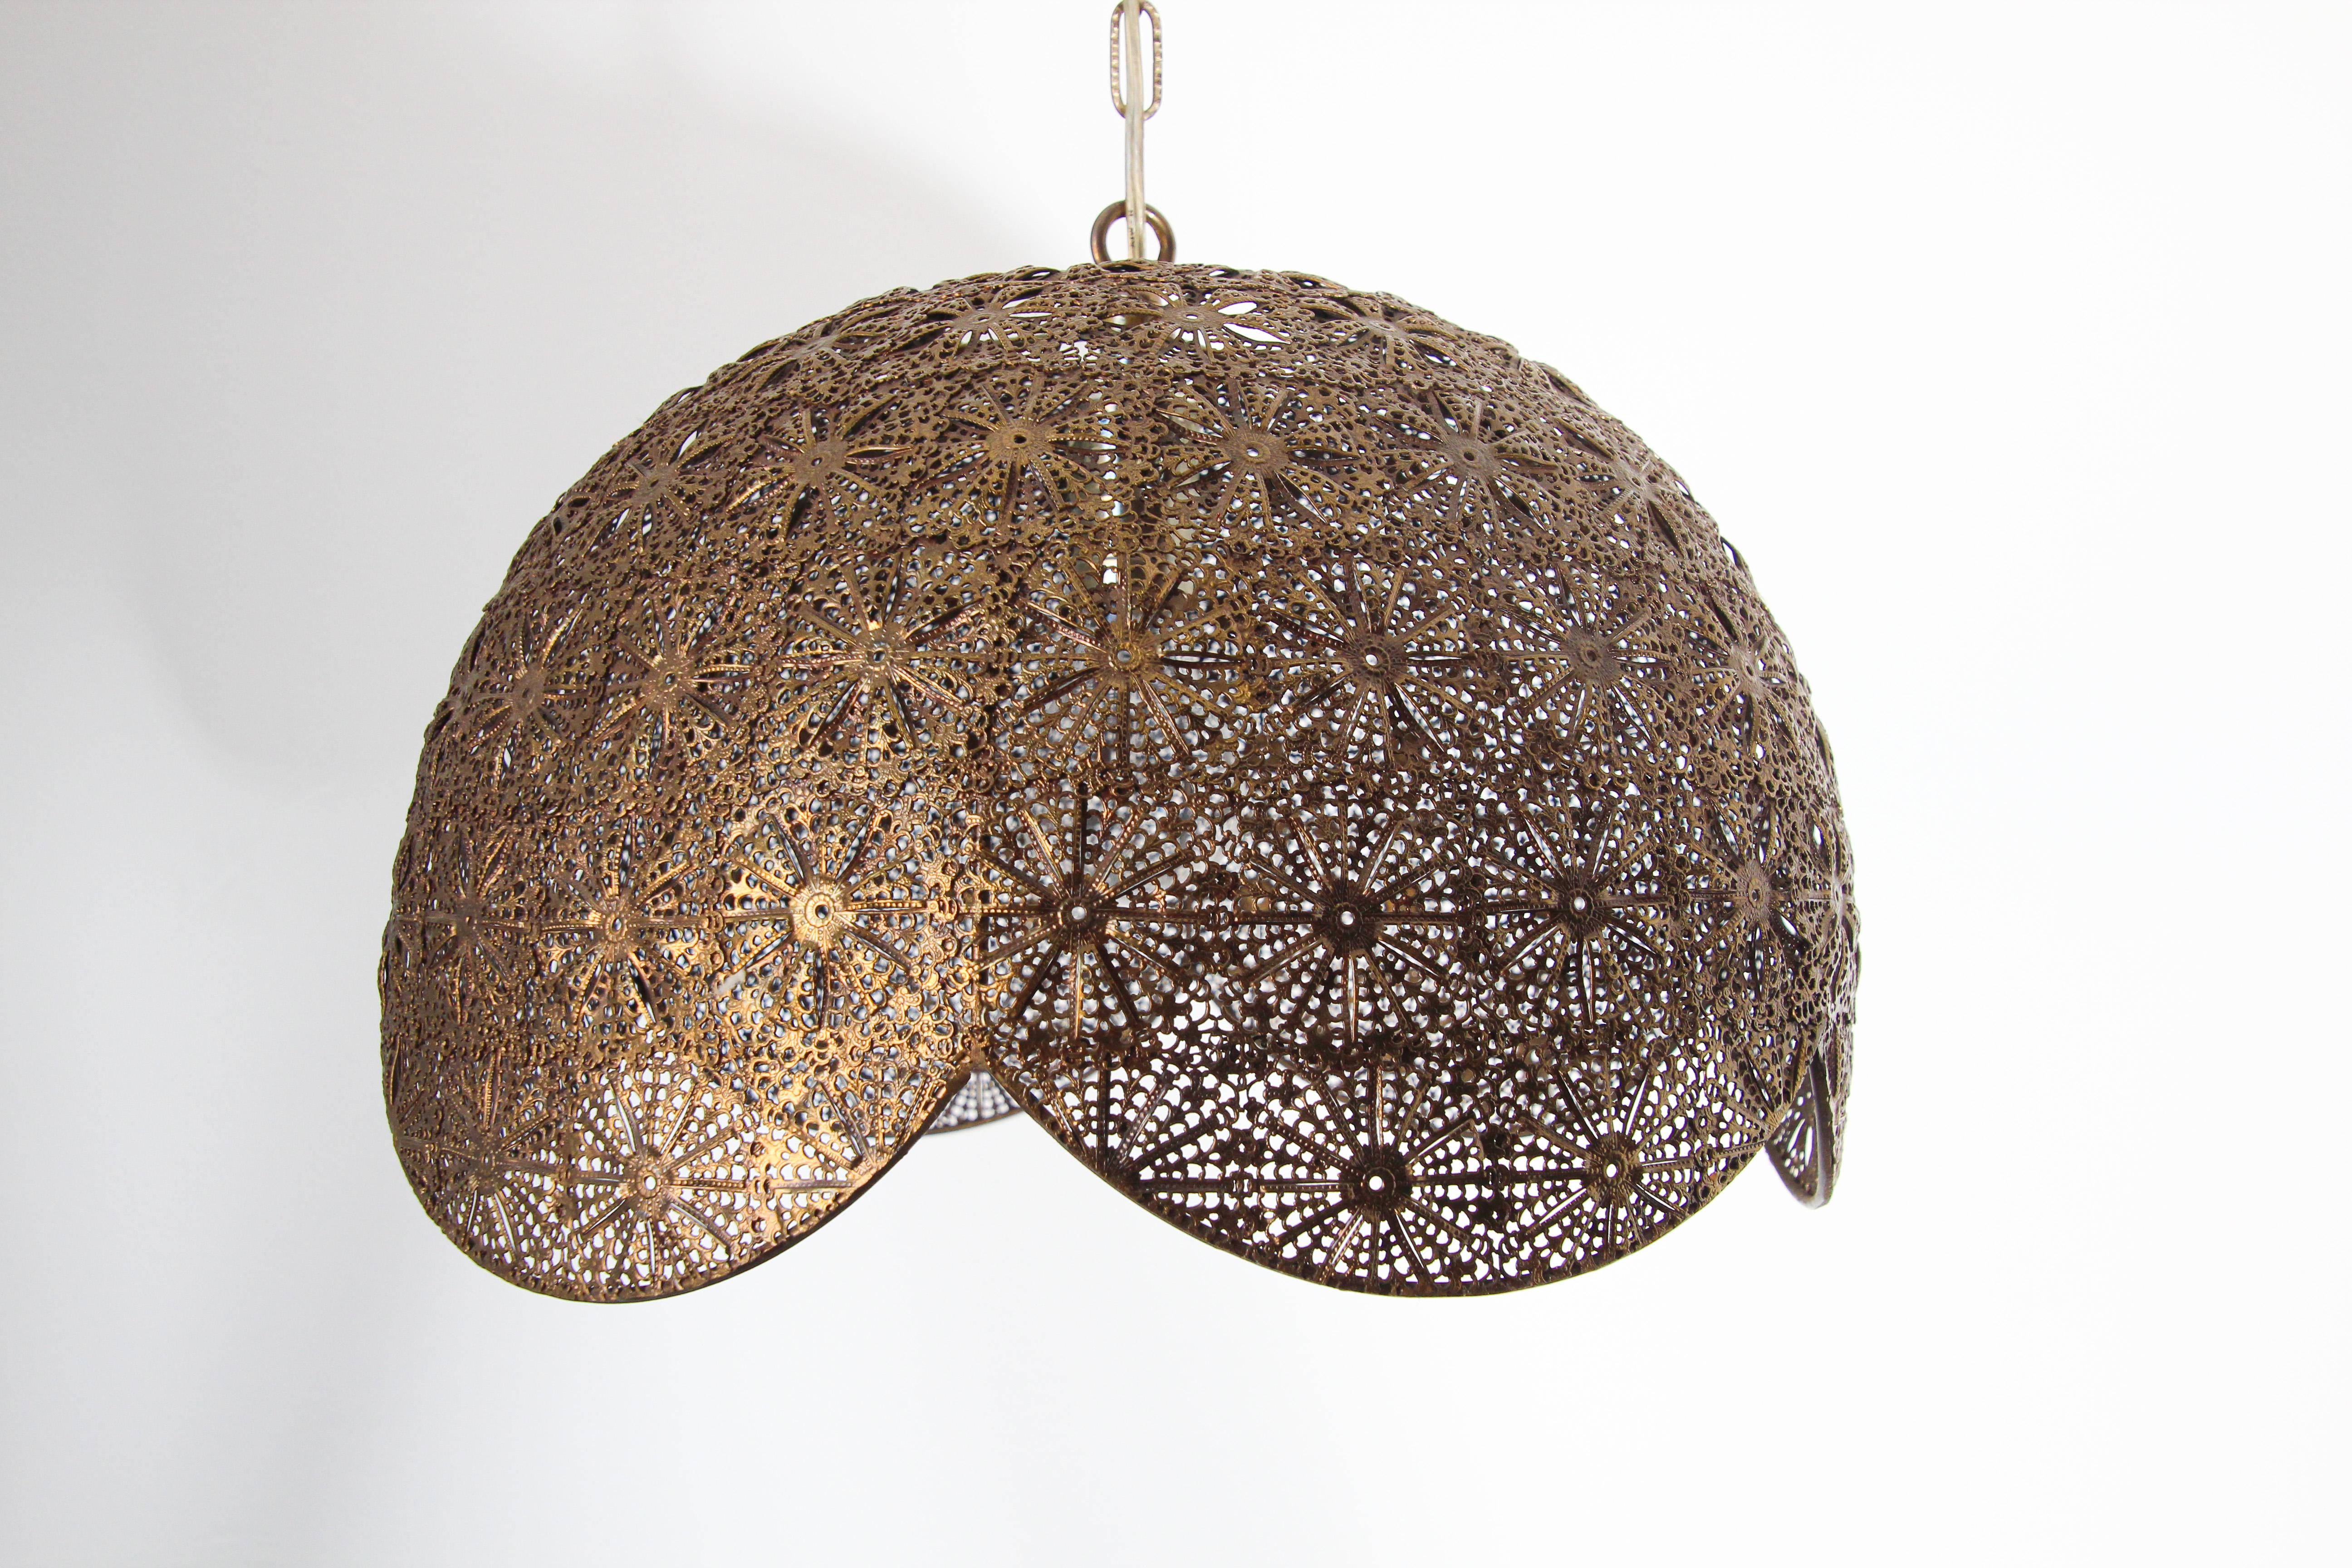 Vintage Moorish, Middle Eastern Turkish style filigree pierced brass hanging lamp. 
Unique ceiling fixture finely handcrafted in brass fine work with nice geometric Moorish filigree floral designs. Rewired for electricity with one light bulb.